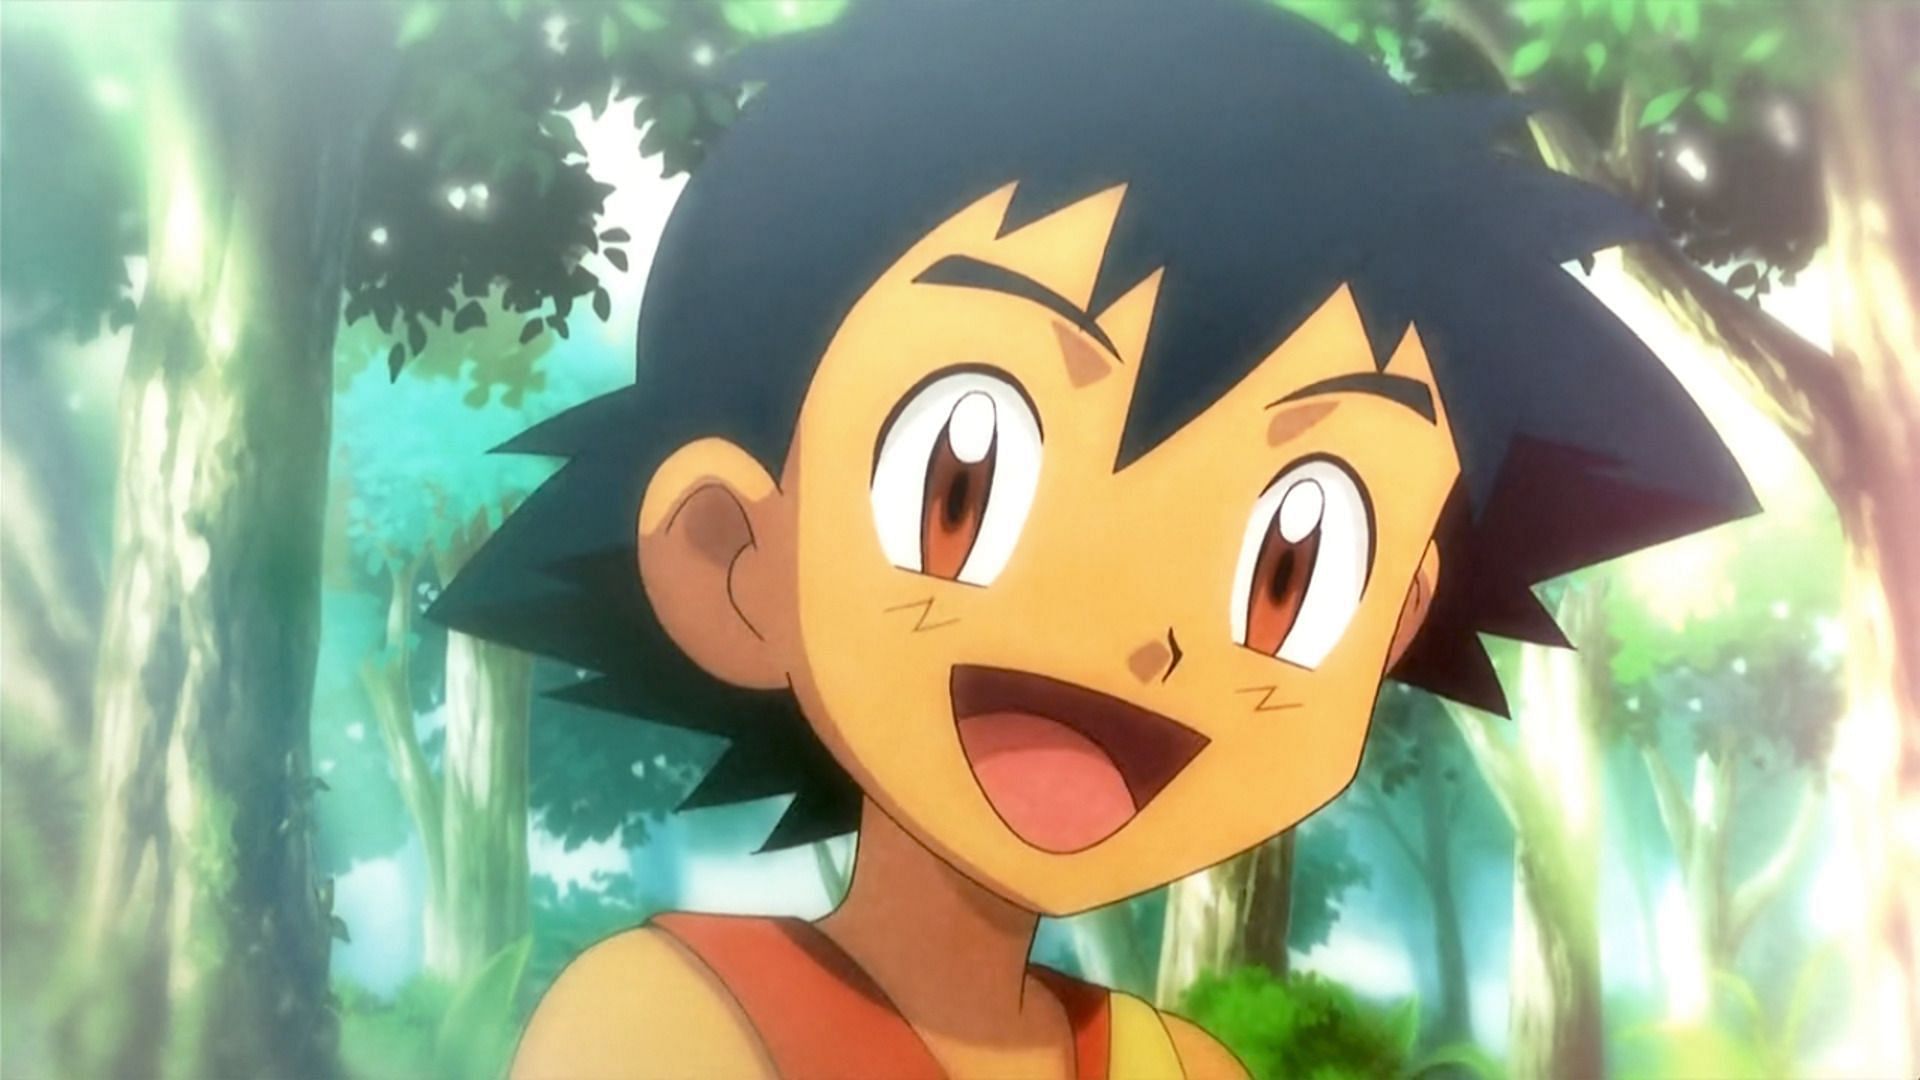 Ash as seen in the anime